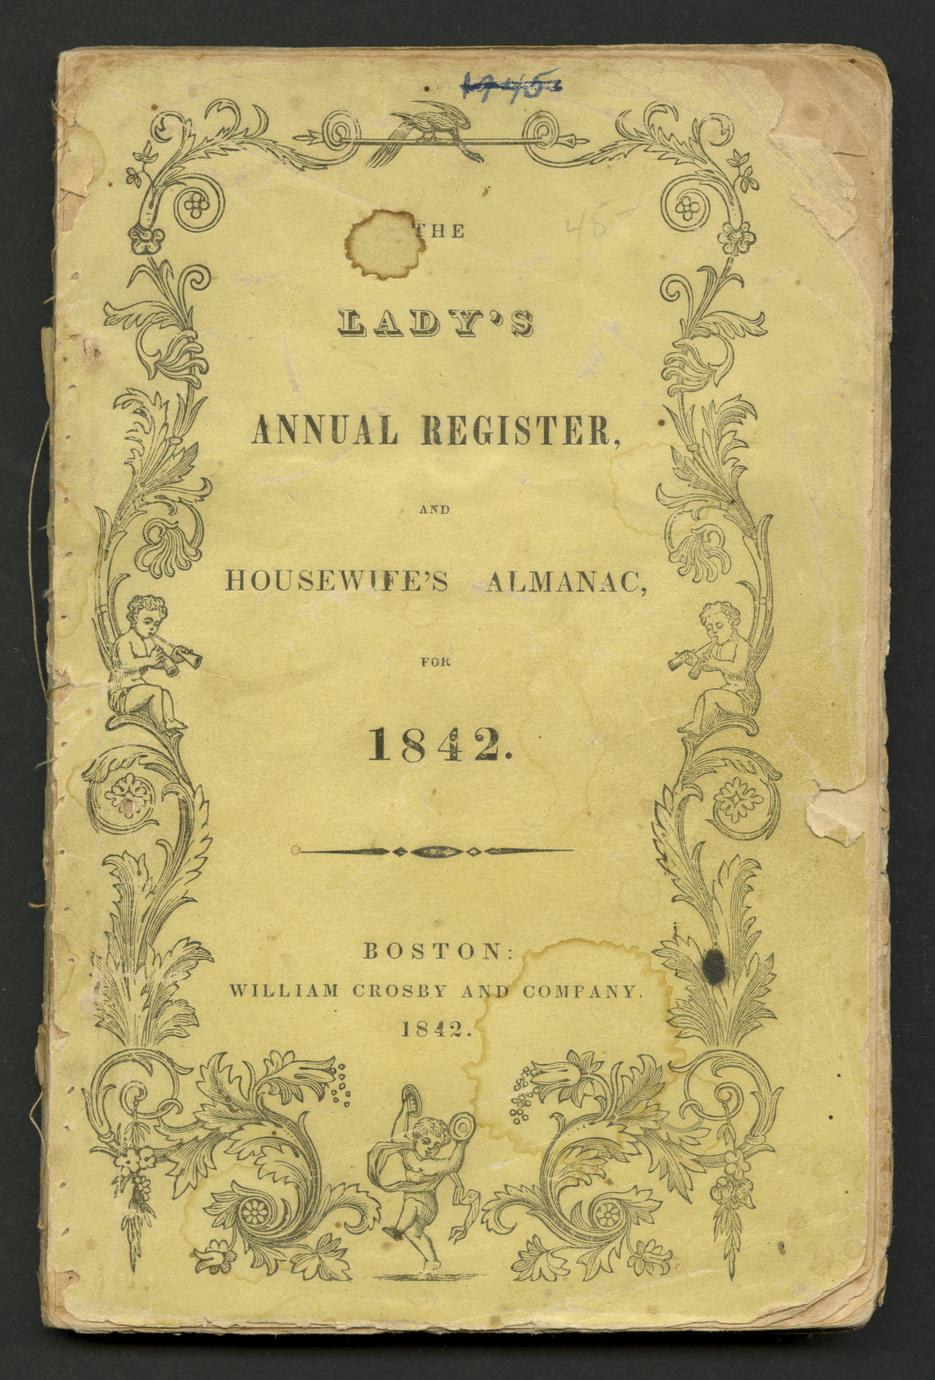 The Lady's annual register, and housewife's almanac, for 1842